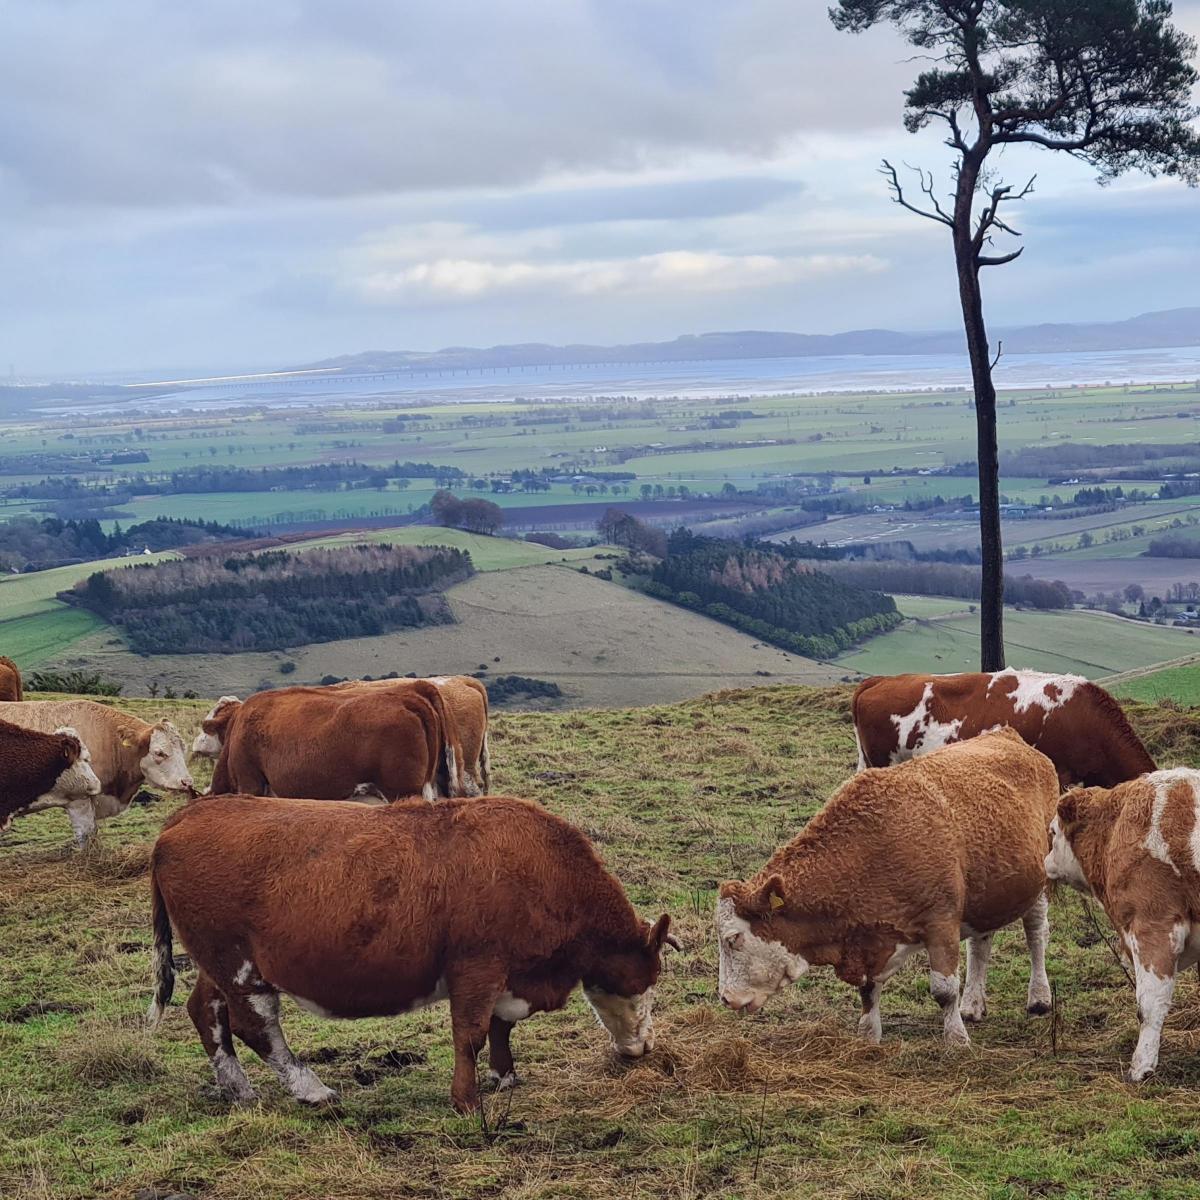 Pamela Cameron (Shanry Farm) - Tayview, cows enjoying breakfast with a view to the tay bridges